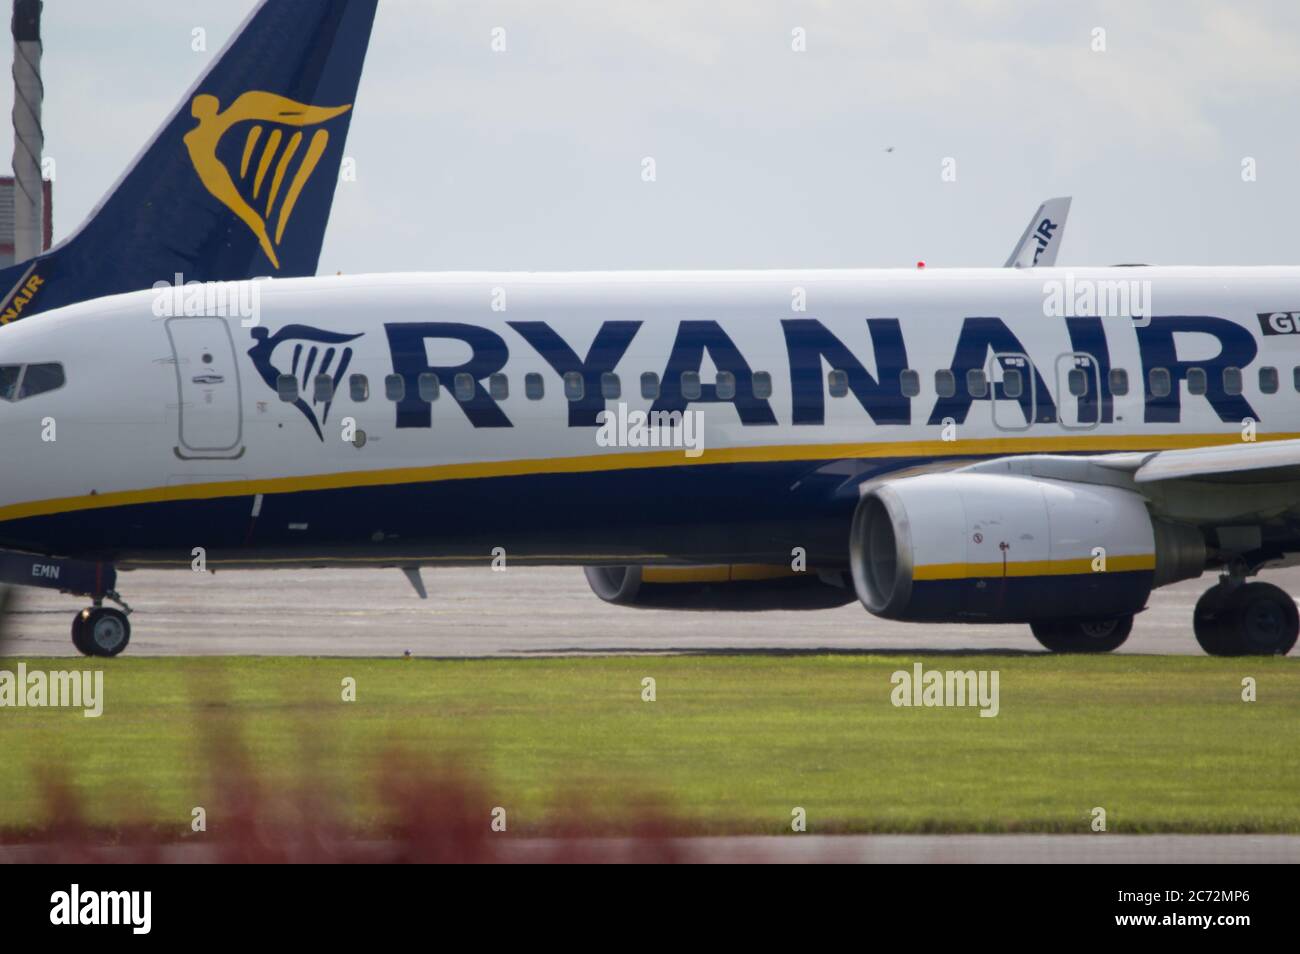 Prestwick, Scotland, UK. 13th July, 2020. Pictured: A Ryanair flight (Boeing 737-800) departing Prestwick Airport for a European holiday destination. Ryanair has been operating full schedules since the 1st July due to the coronavirus (COVID19) crisis which has affected the global aviation industry. Passengers are required to wear face masks on their flights until further notice to help prevent the spread of coronavirus. Credit: Colin Fisher/Alamy Live News Stock Photo